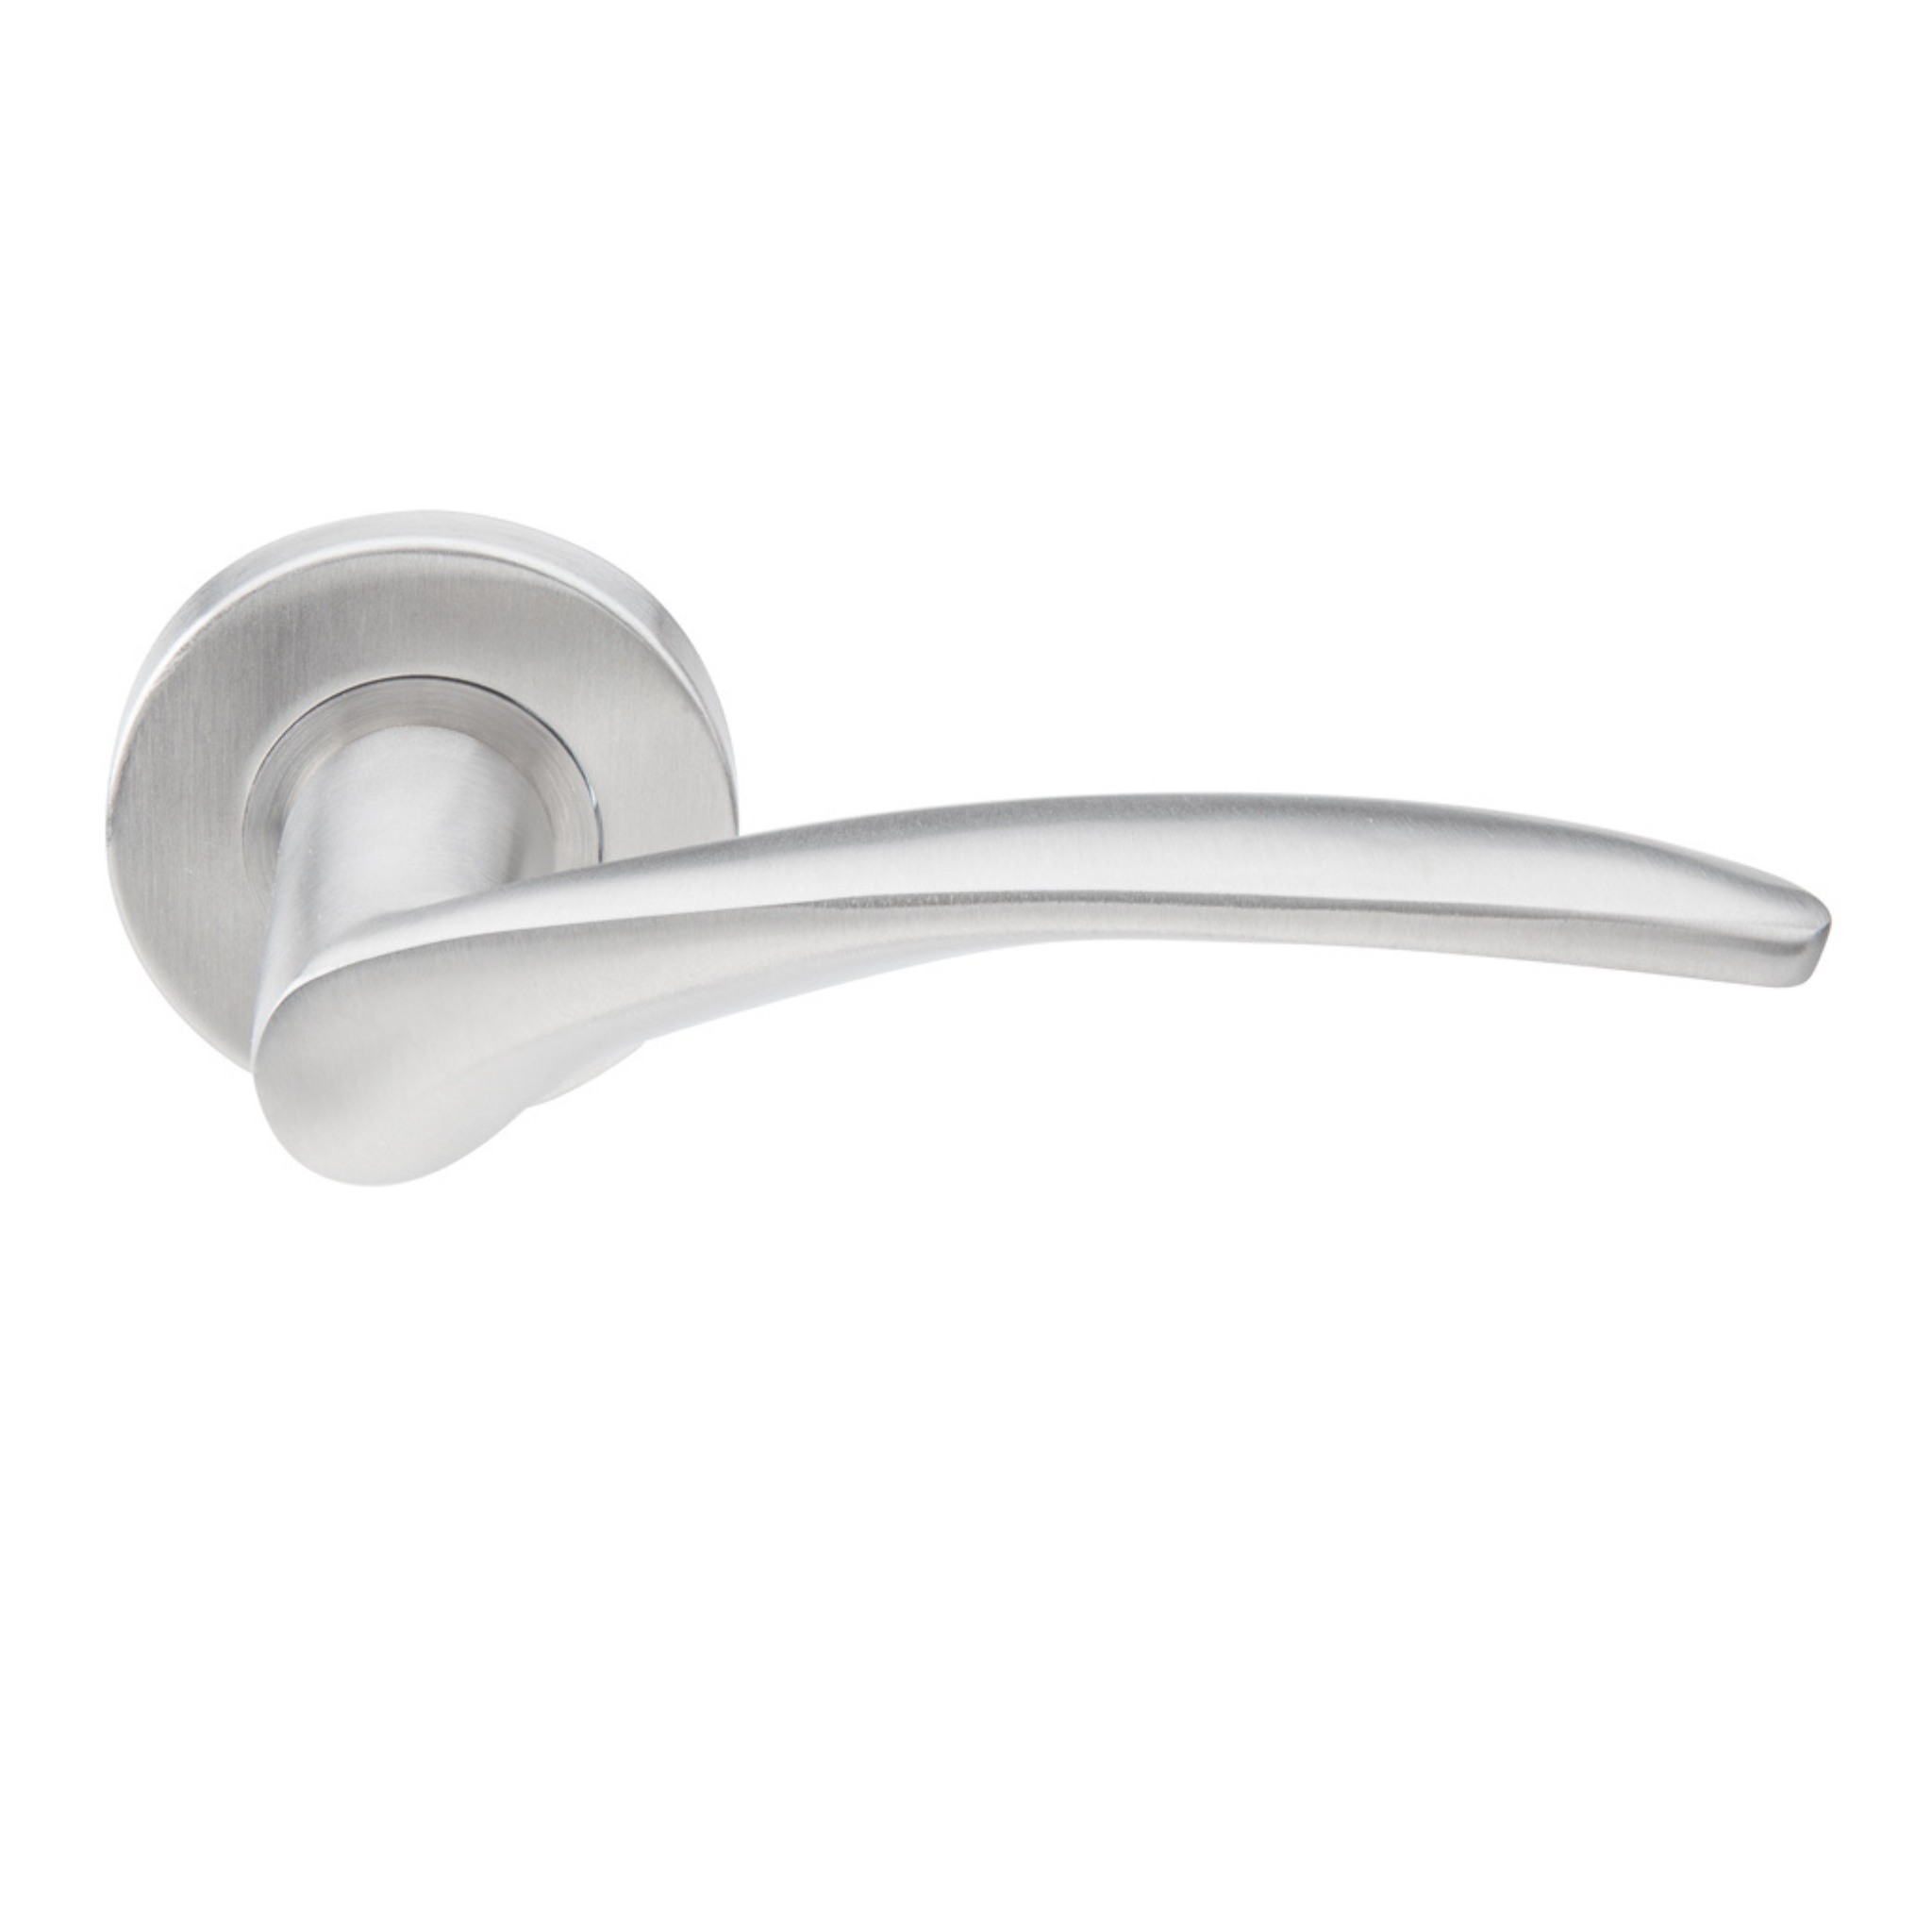 SH 822, Lever Handles, Solid, On Round Rose, With Escutcheons, 135mm (l), Stainless Steel, DORMAKABA